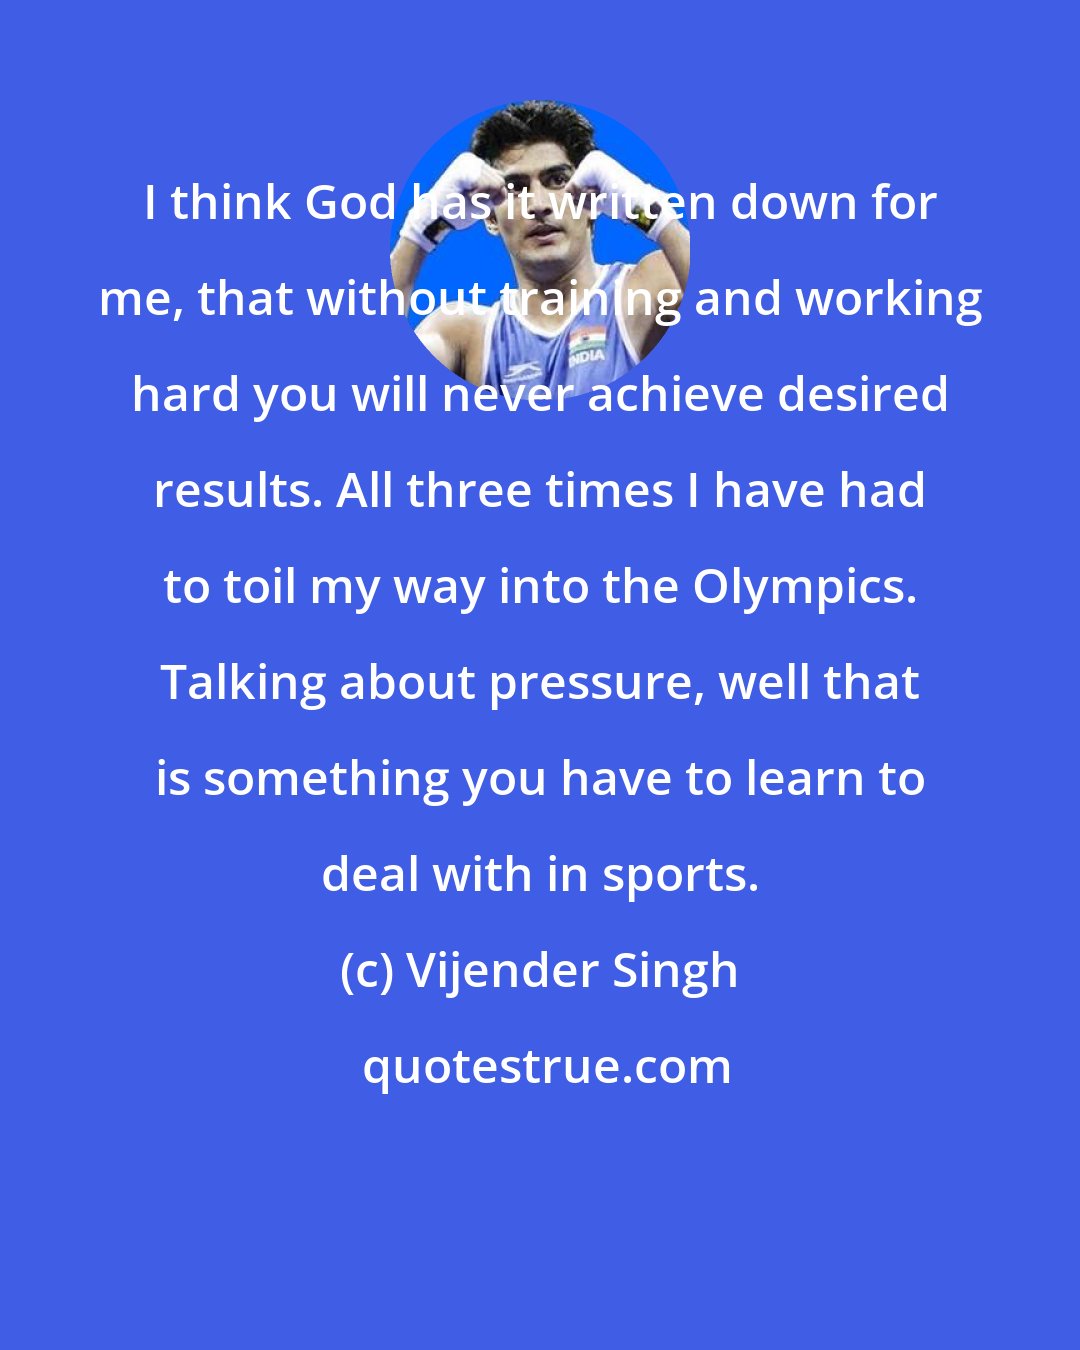 Vijender Singh: I think God has it written down for me, that without training and working hard you will never achieve desired results. All three times I have had to toil my way into the Olympics. Talking about pressure, well that is something you have to learn to deal with in sports.